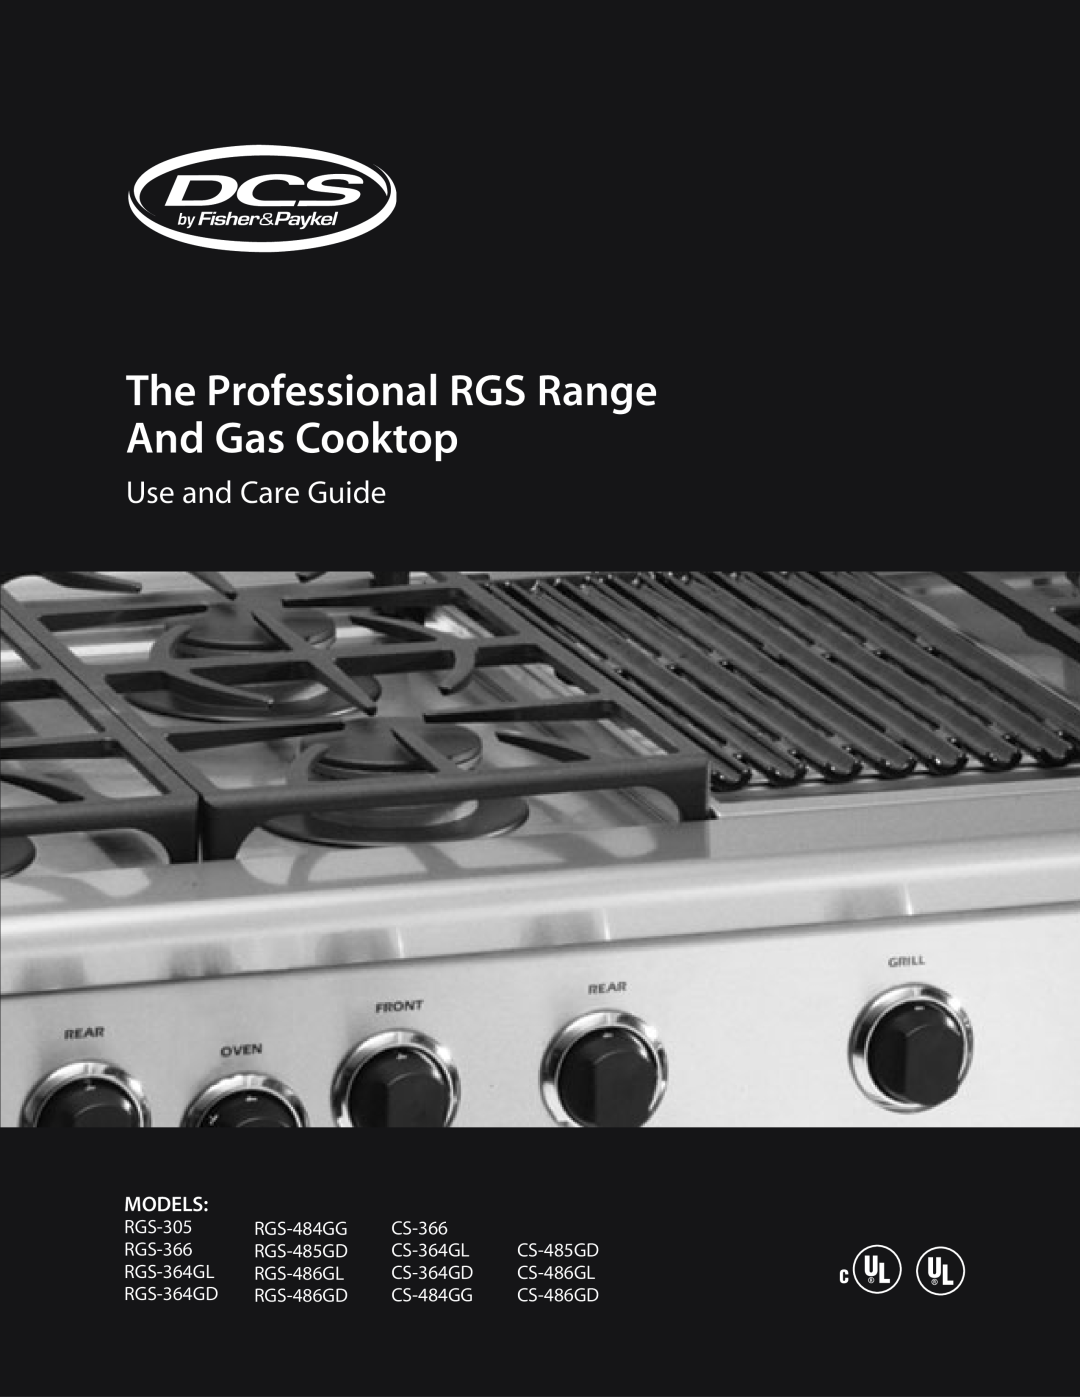 DCS RGS-484GG, RGS-486GL, CS-364GD manual The Professional RGS Range And Gas Cooktop, Use and Care Guide, Models, RGS-305 